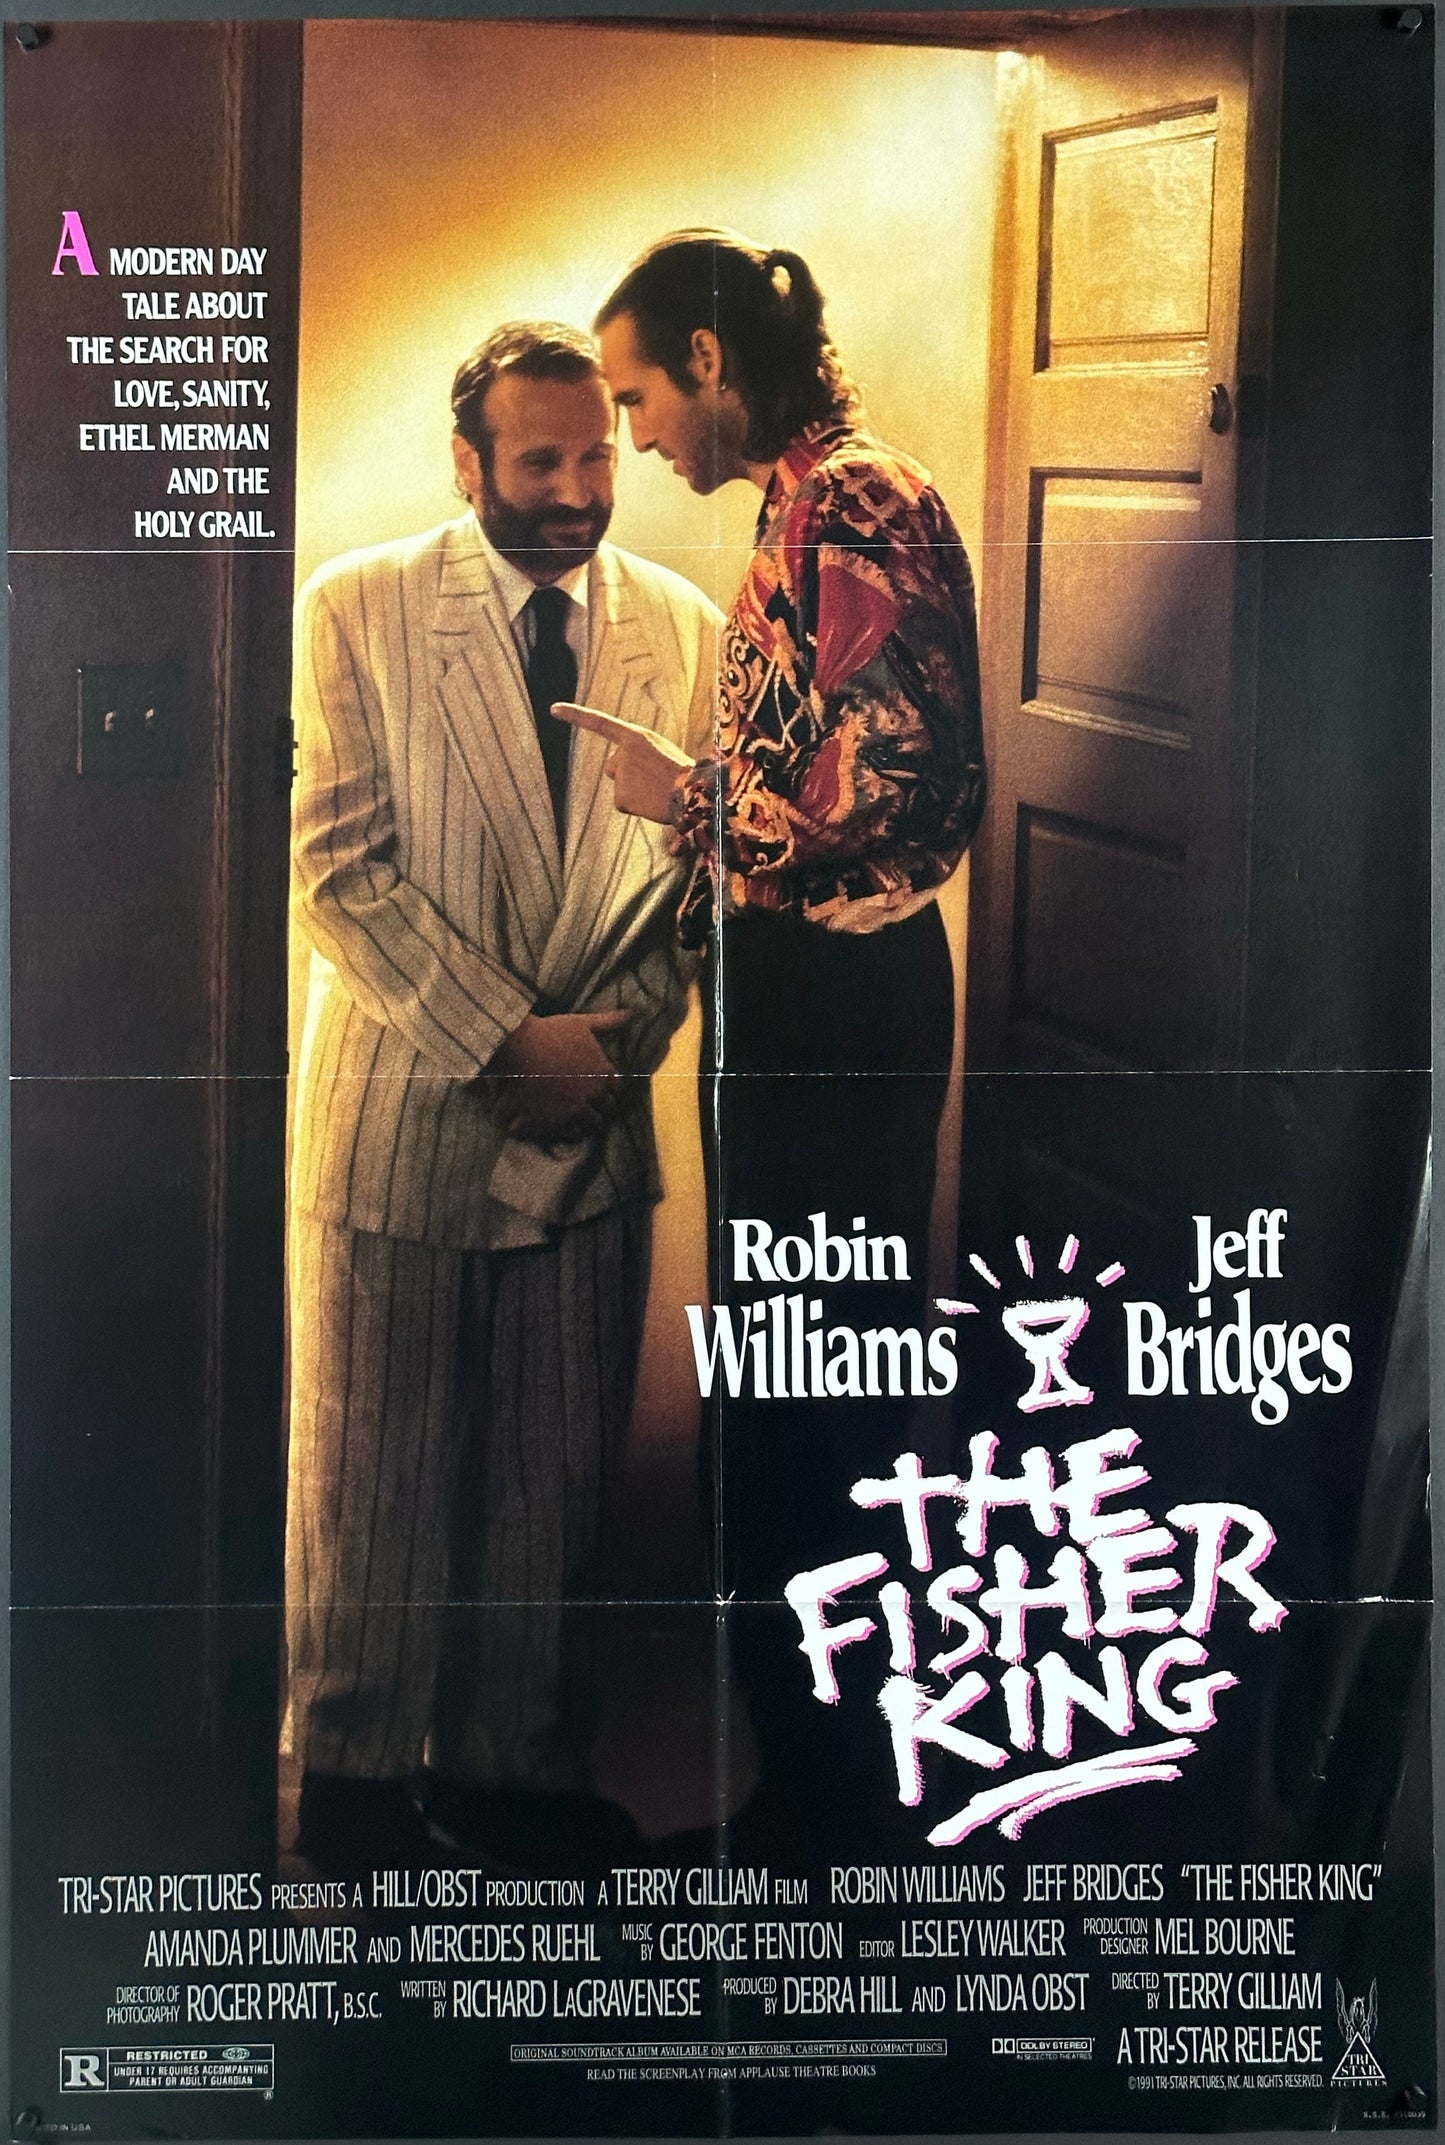 The Fisher King - posterpalace.com